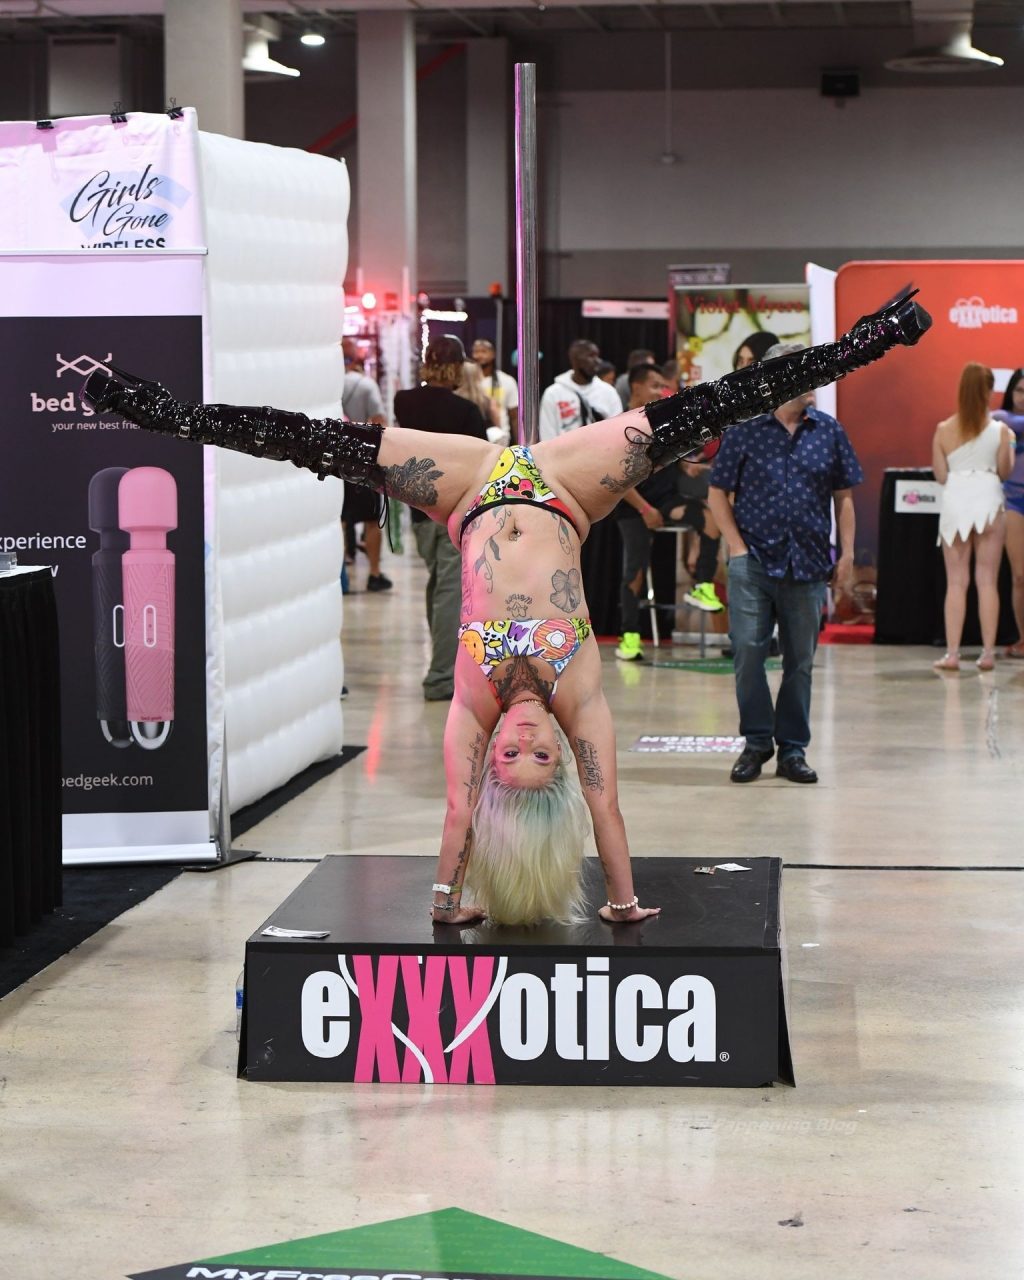 Adult Film Stars Attend the Exxxotica Expo in Miami (55 Photos)